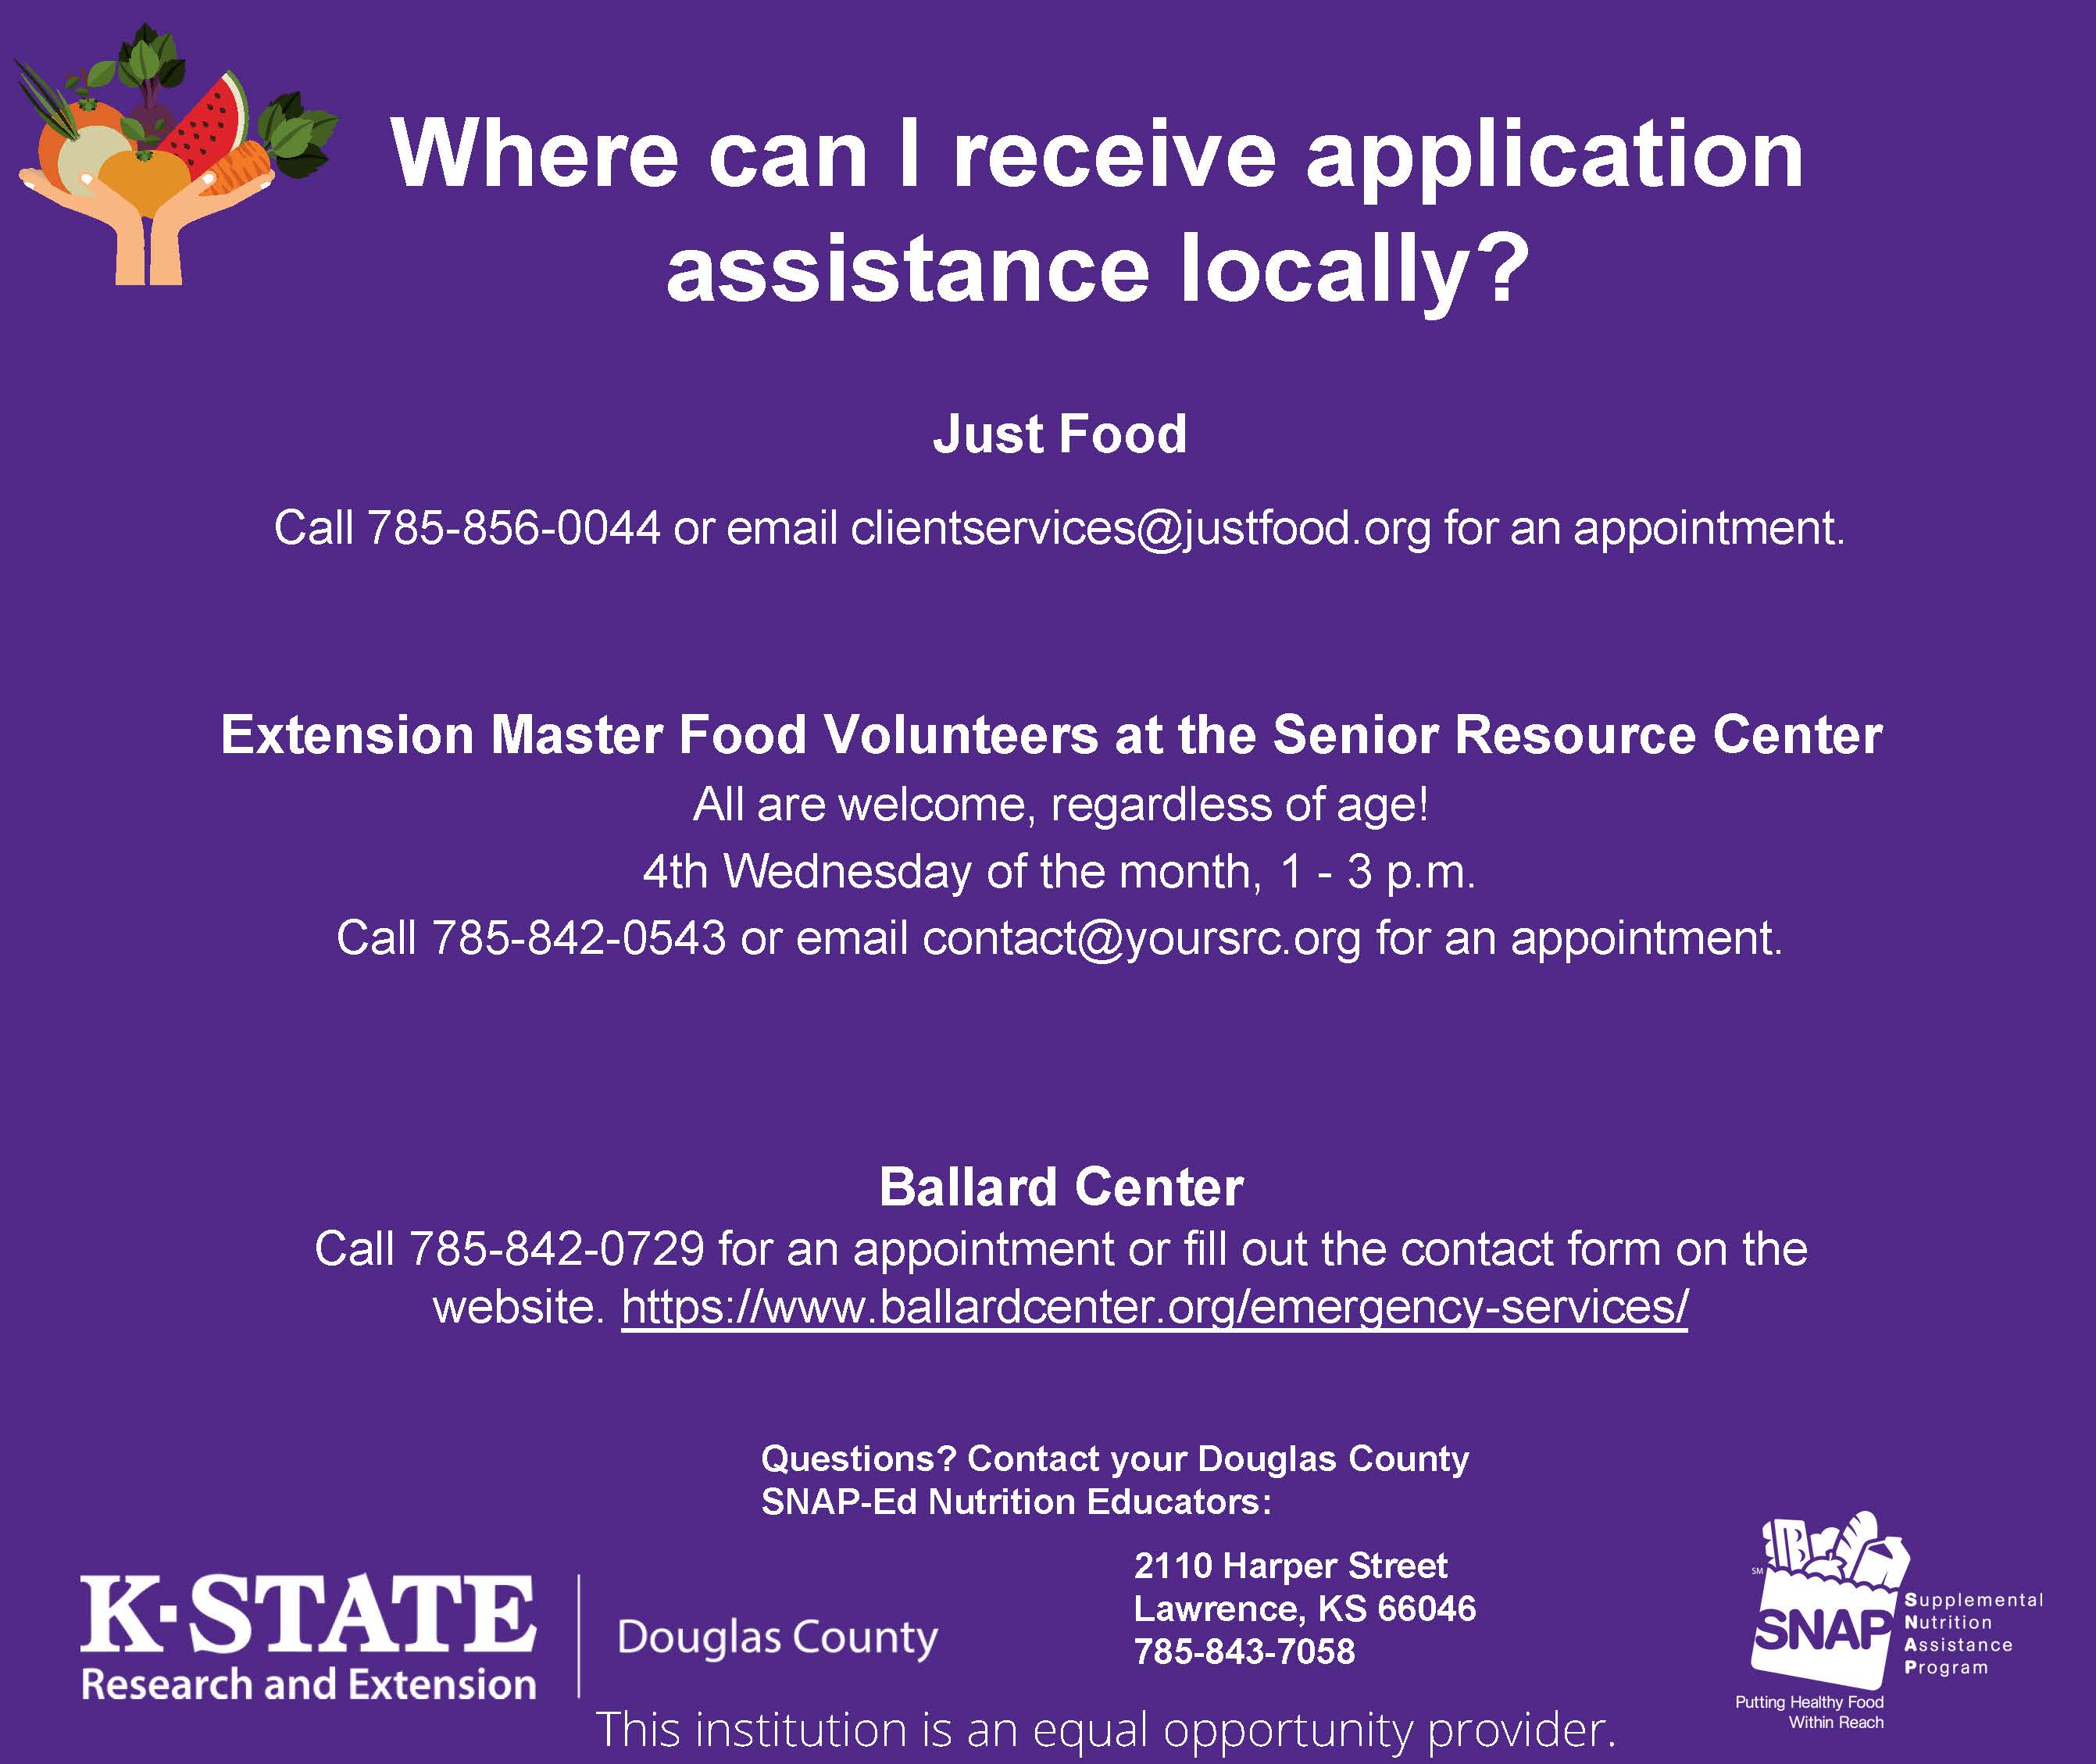 Department of Children & Families - Douglas County  Receive a mailed application or pick up a paper application outside the  office (there is a drop box for completed applications). Online SNAP Application Harvesters  Check eligibility with SNAP hotline  877-653-9522 or email SNAP@harvesters.org and receive assistance over the phone. https://www.harvesters.org/get-food-assistance/snap-assistance | Kansas Appleseed  Check eligibility, start the application, or receive assistance.  https://www.kansasappleseed.org/snapsignup.html | This institution is an equal opportunity provider. 